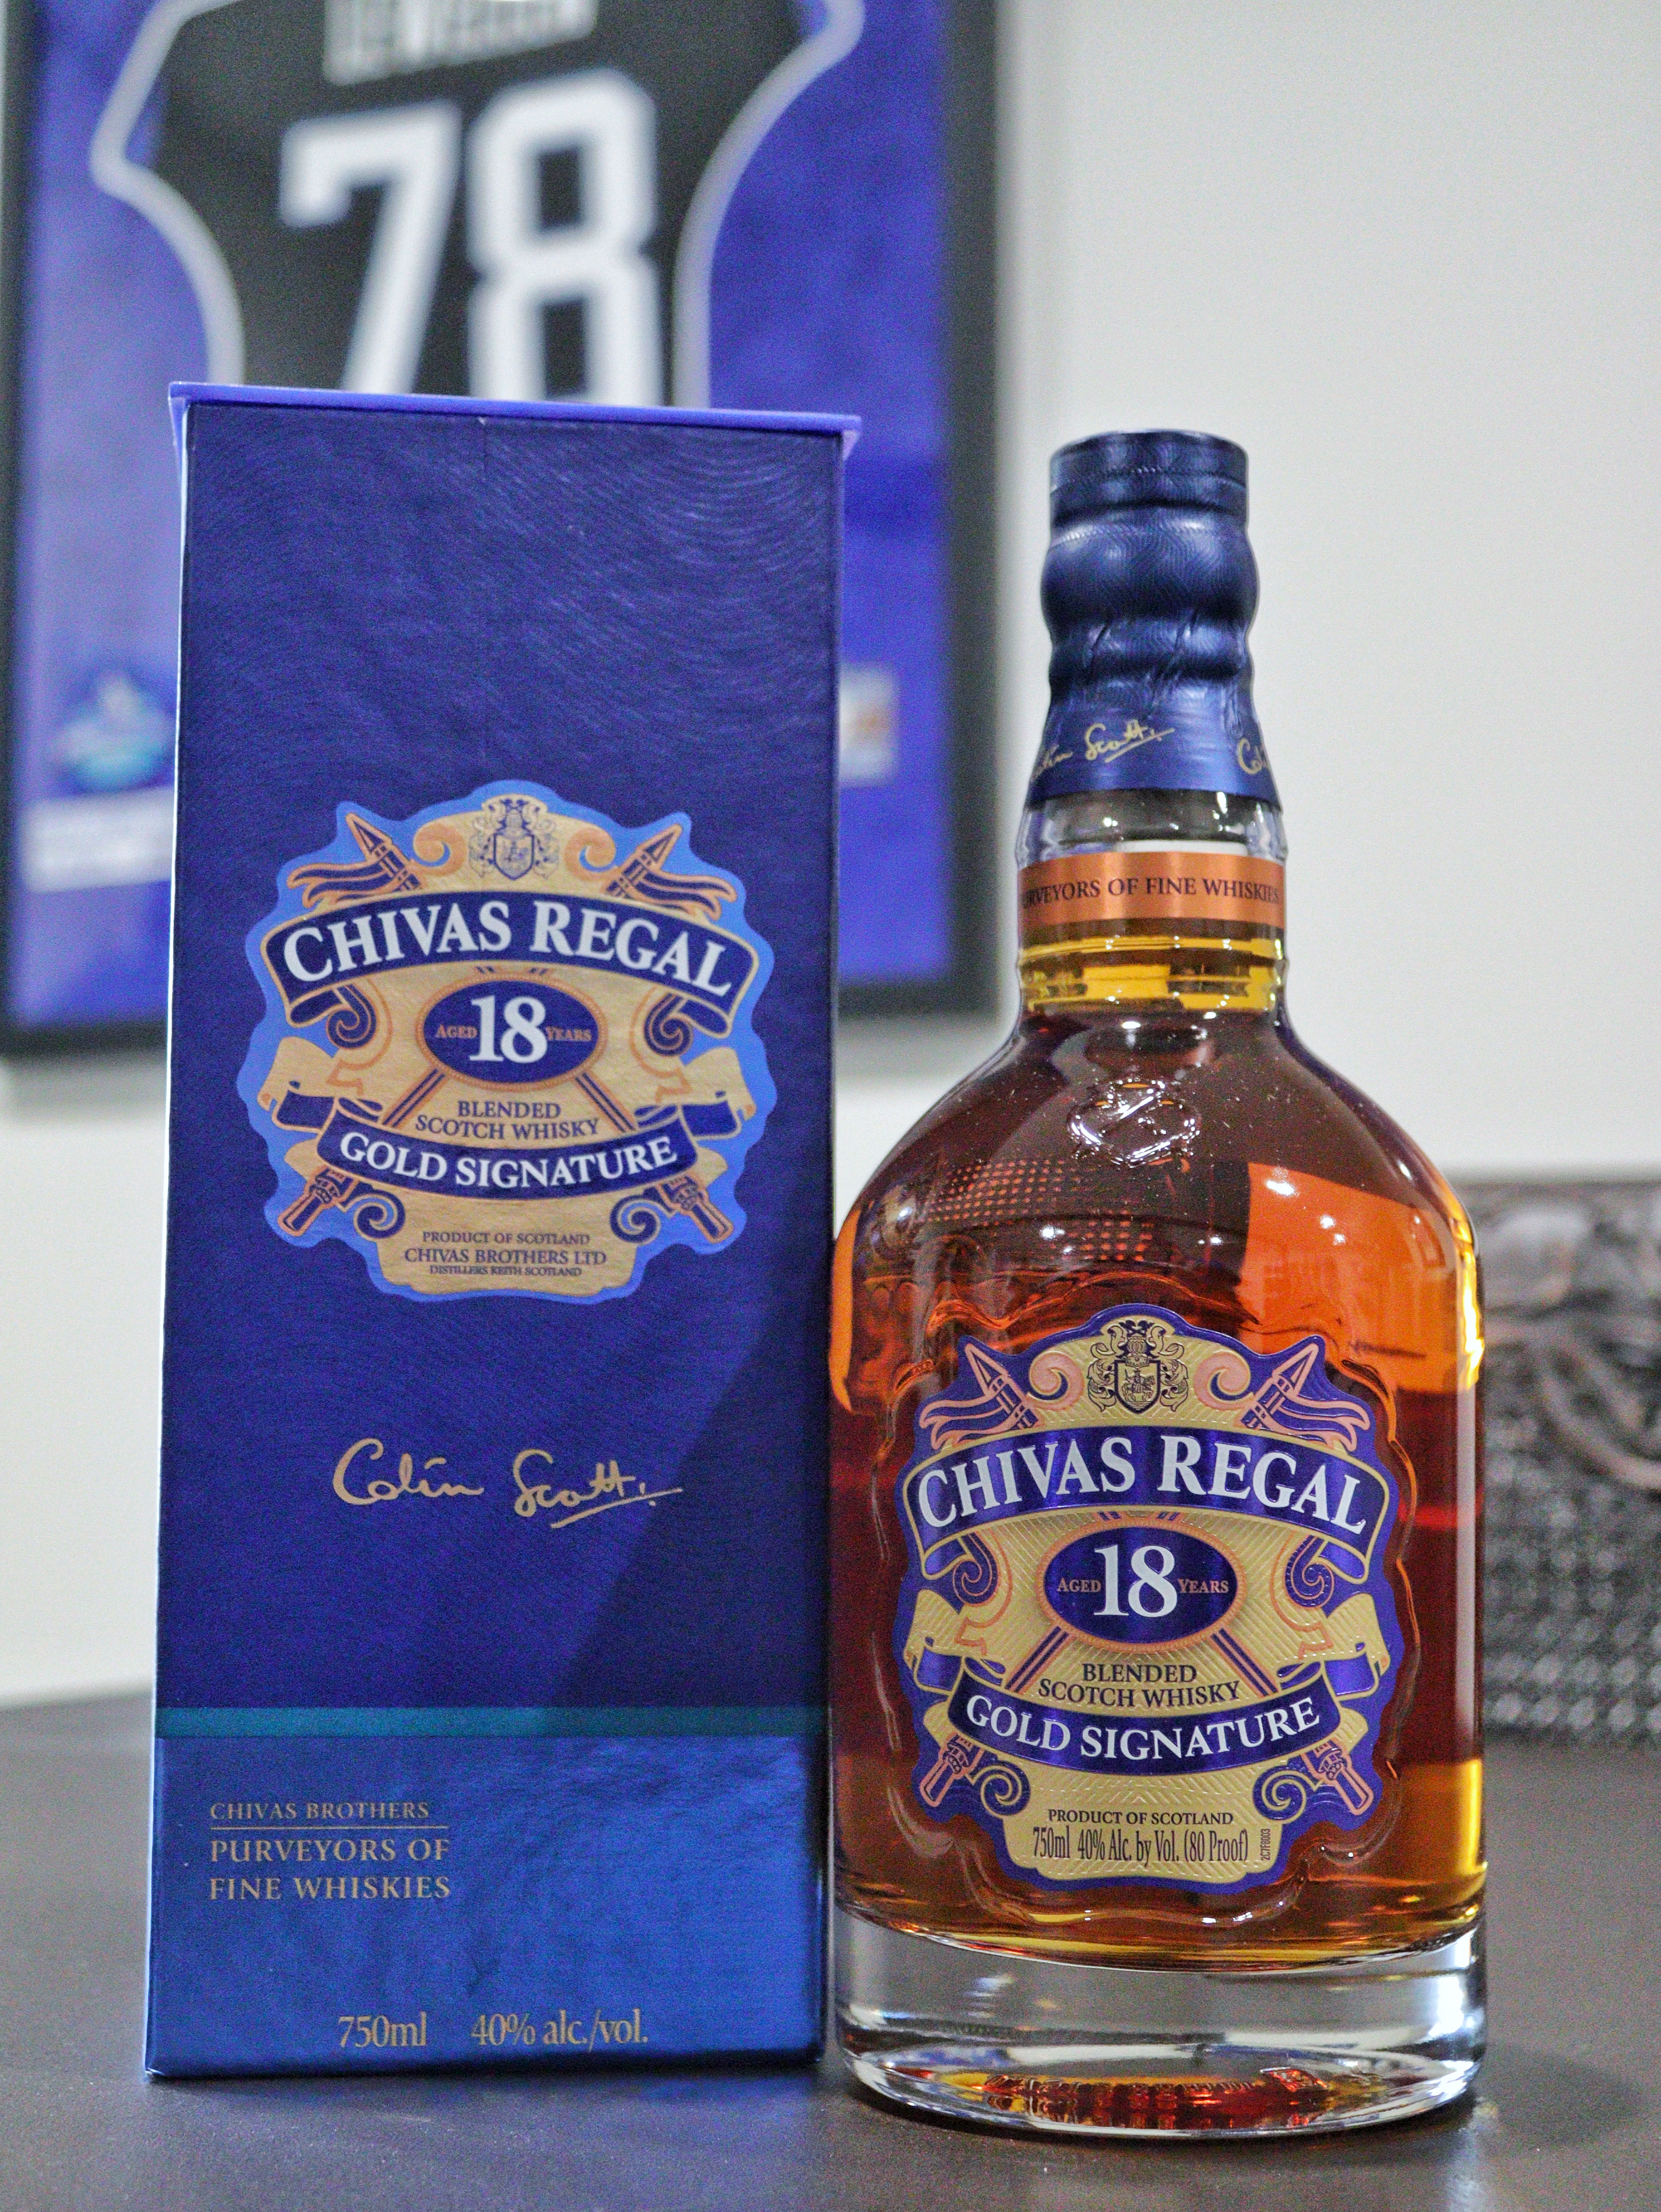 Chivas Regal 18 - My First Ever Blended Scotch Whisky